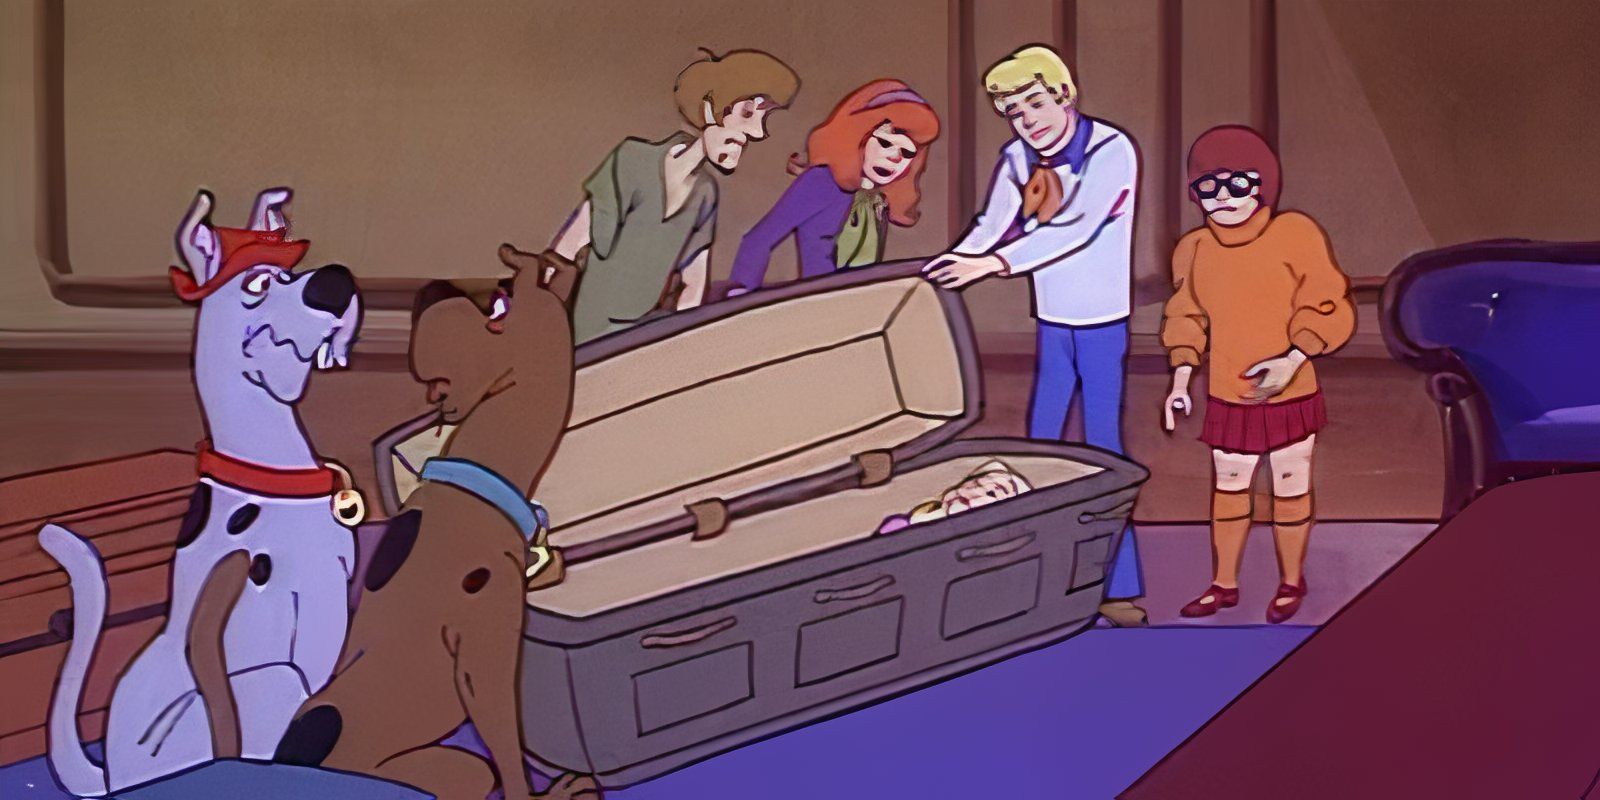 The Scooby gang opening a coffin while Scooby and his cousin watch in a Scooby Doo animated series